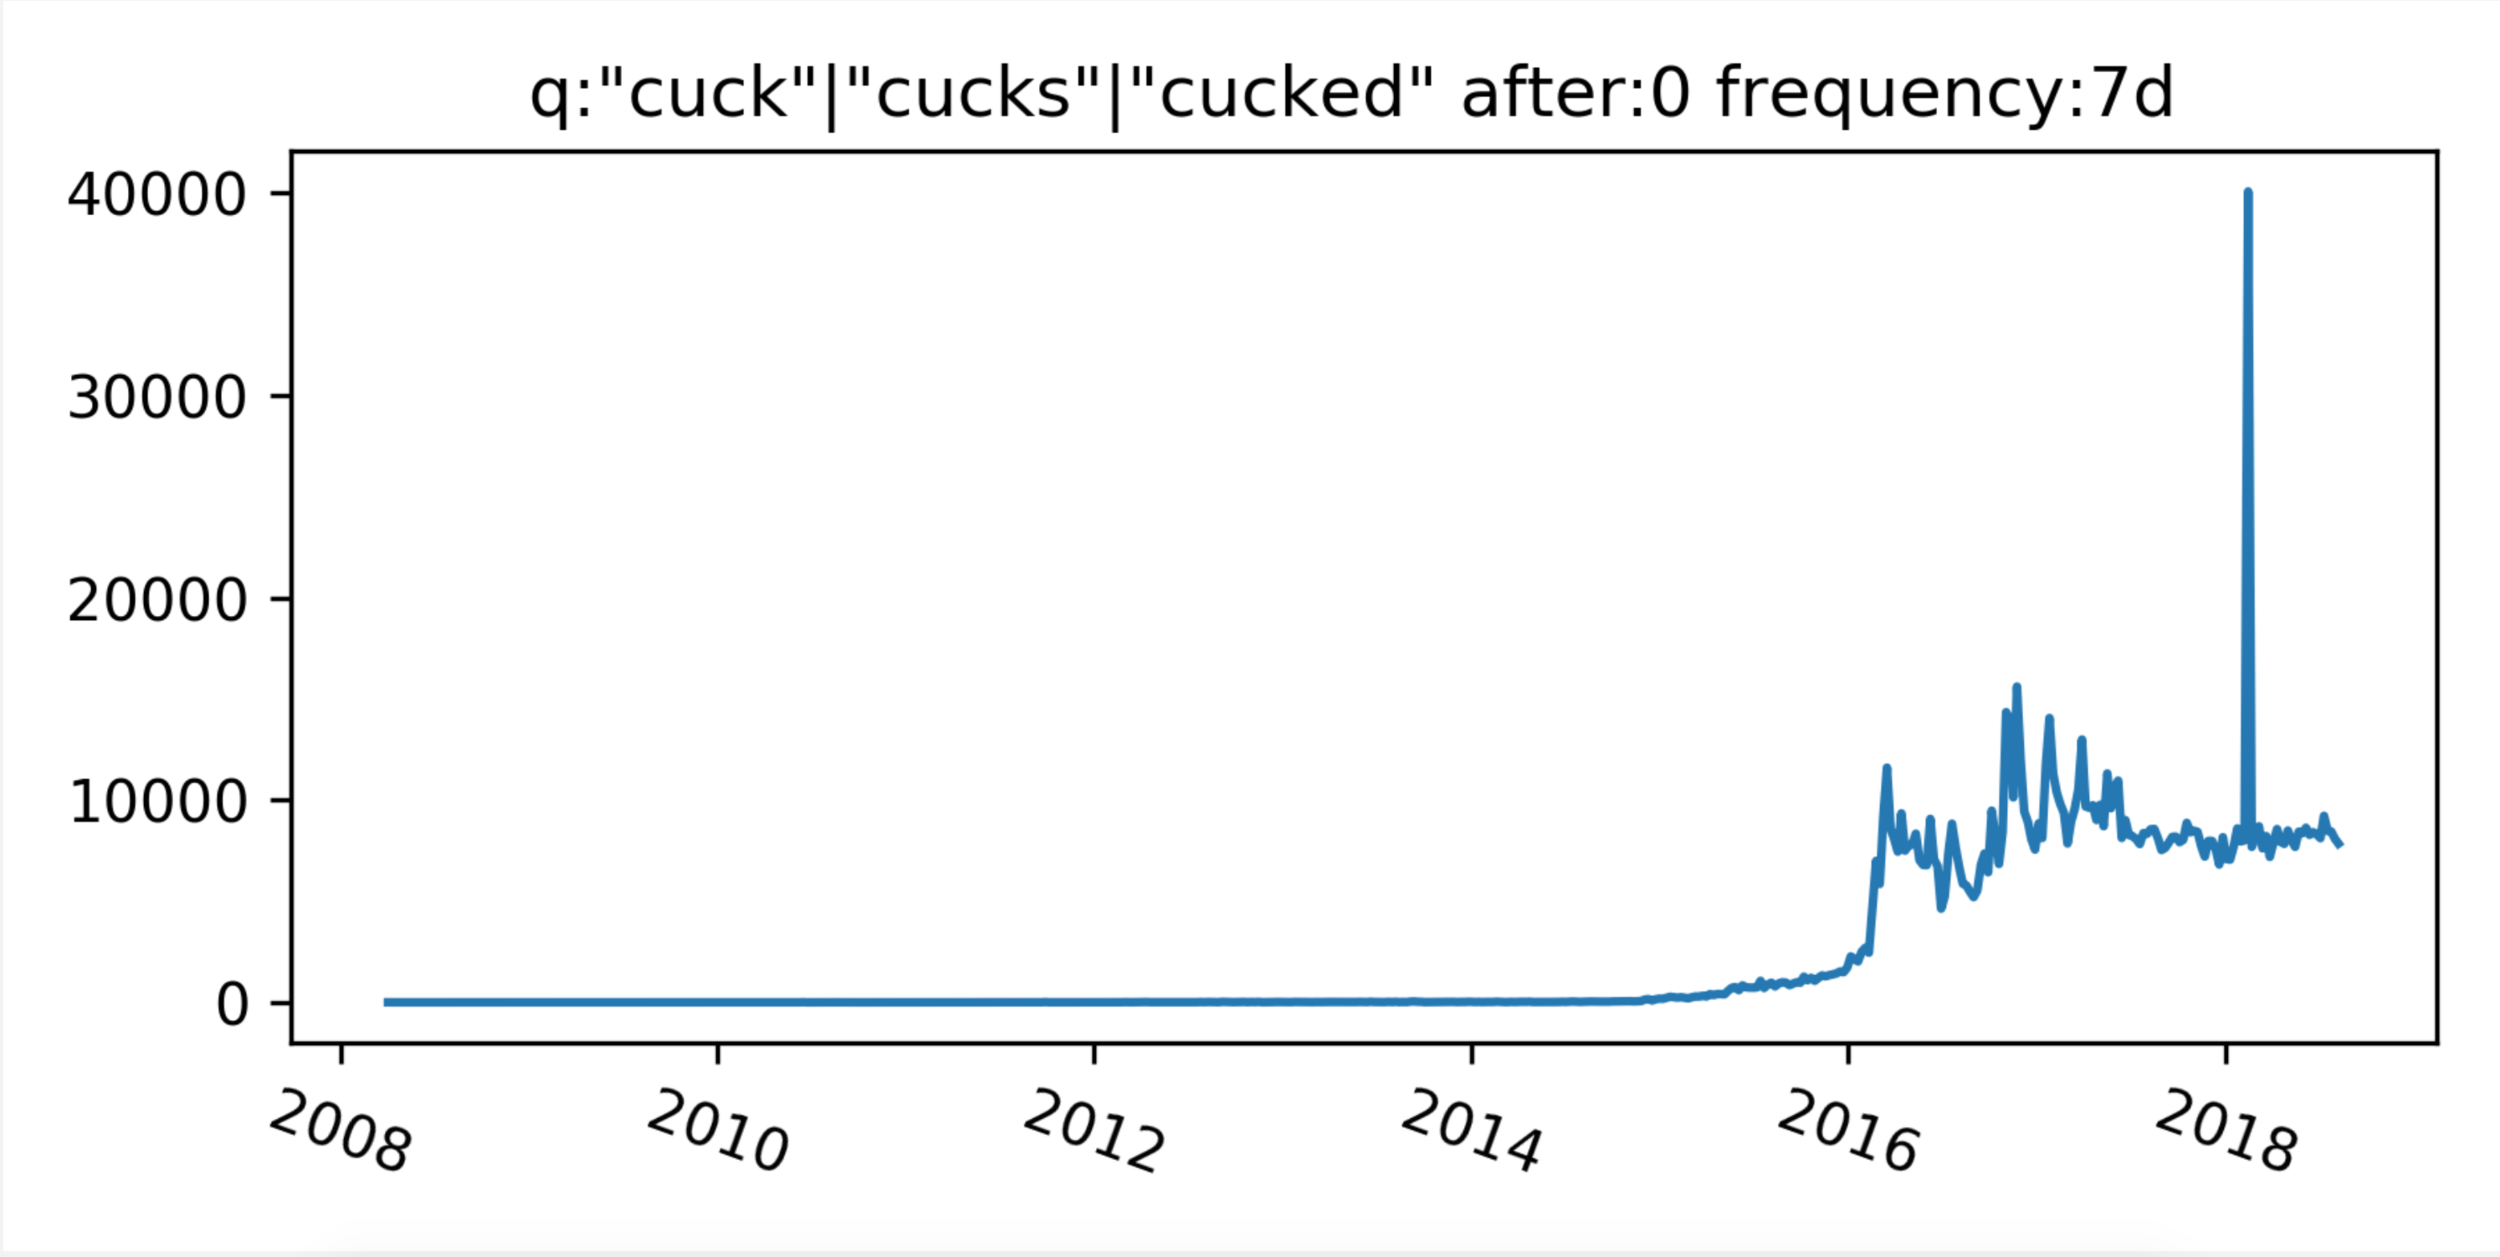 Timeline analysis of the frequency of "cuck"